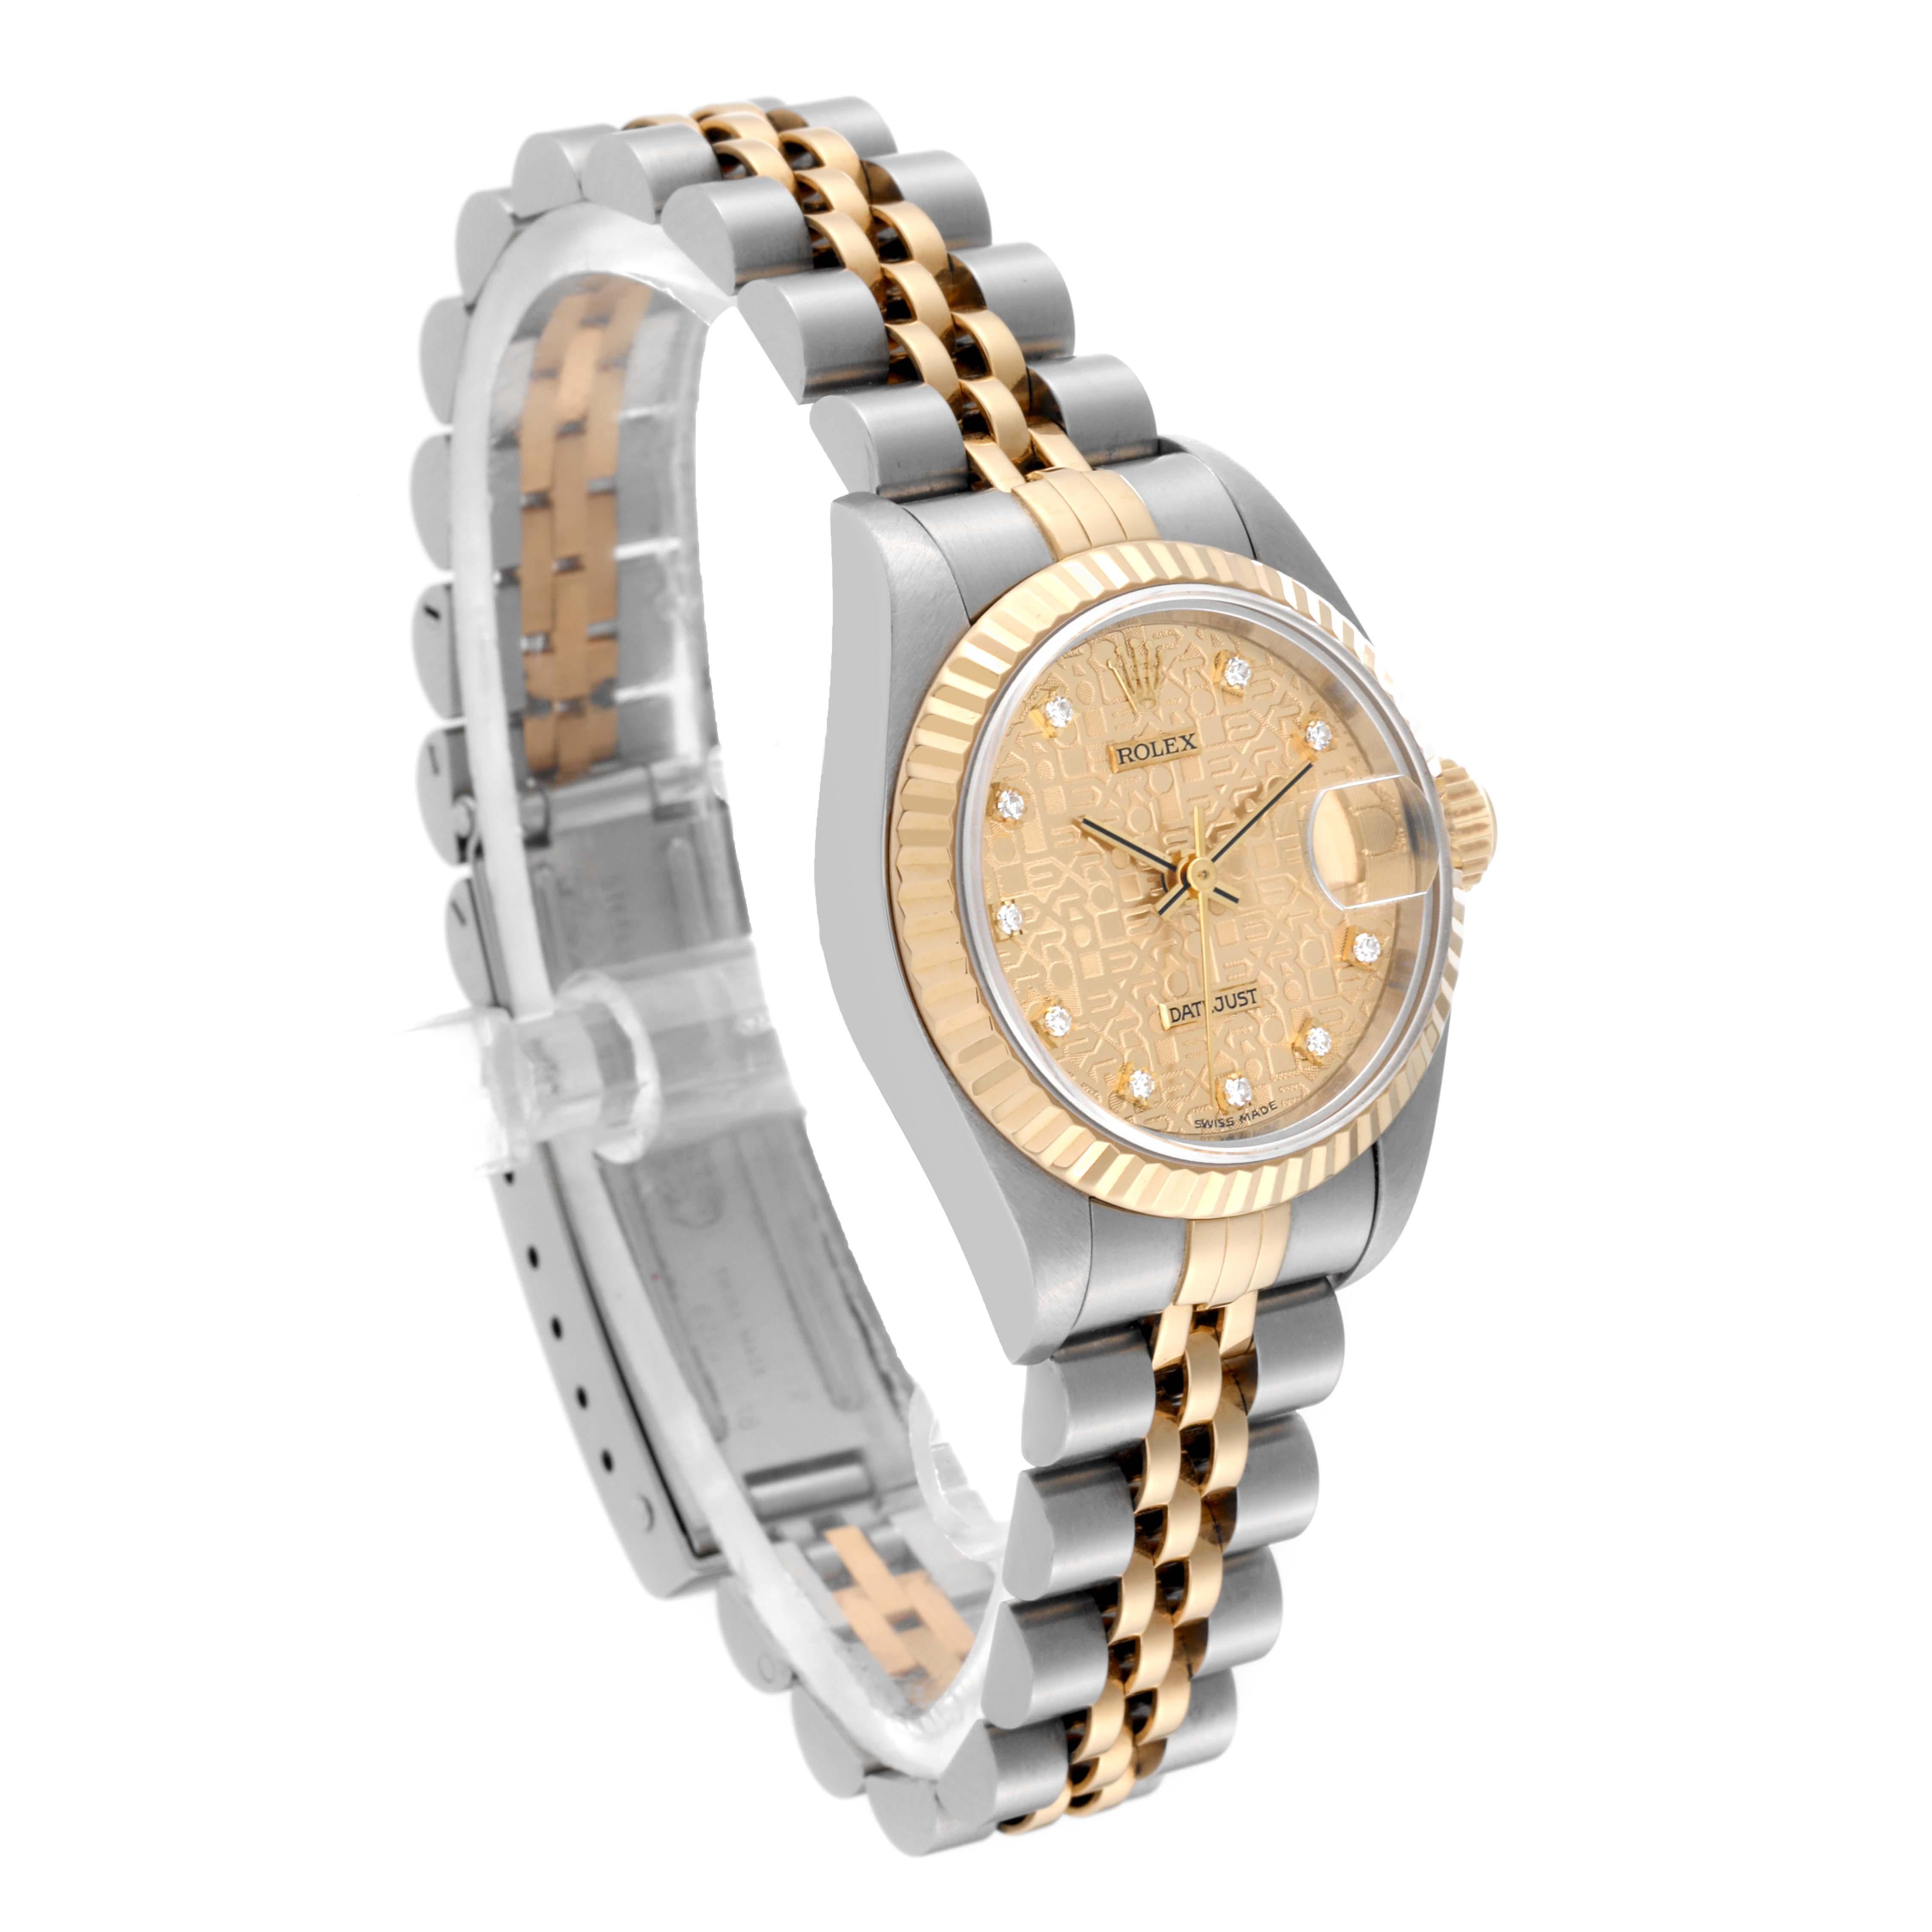 Rolex Datejust Anniversary Diamond Dial Steel Yellow Gold Ladies Watch 69173 In Excellent Condition For Sale In Atlanta, GA